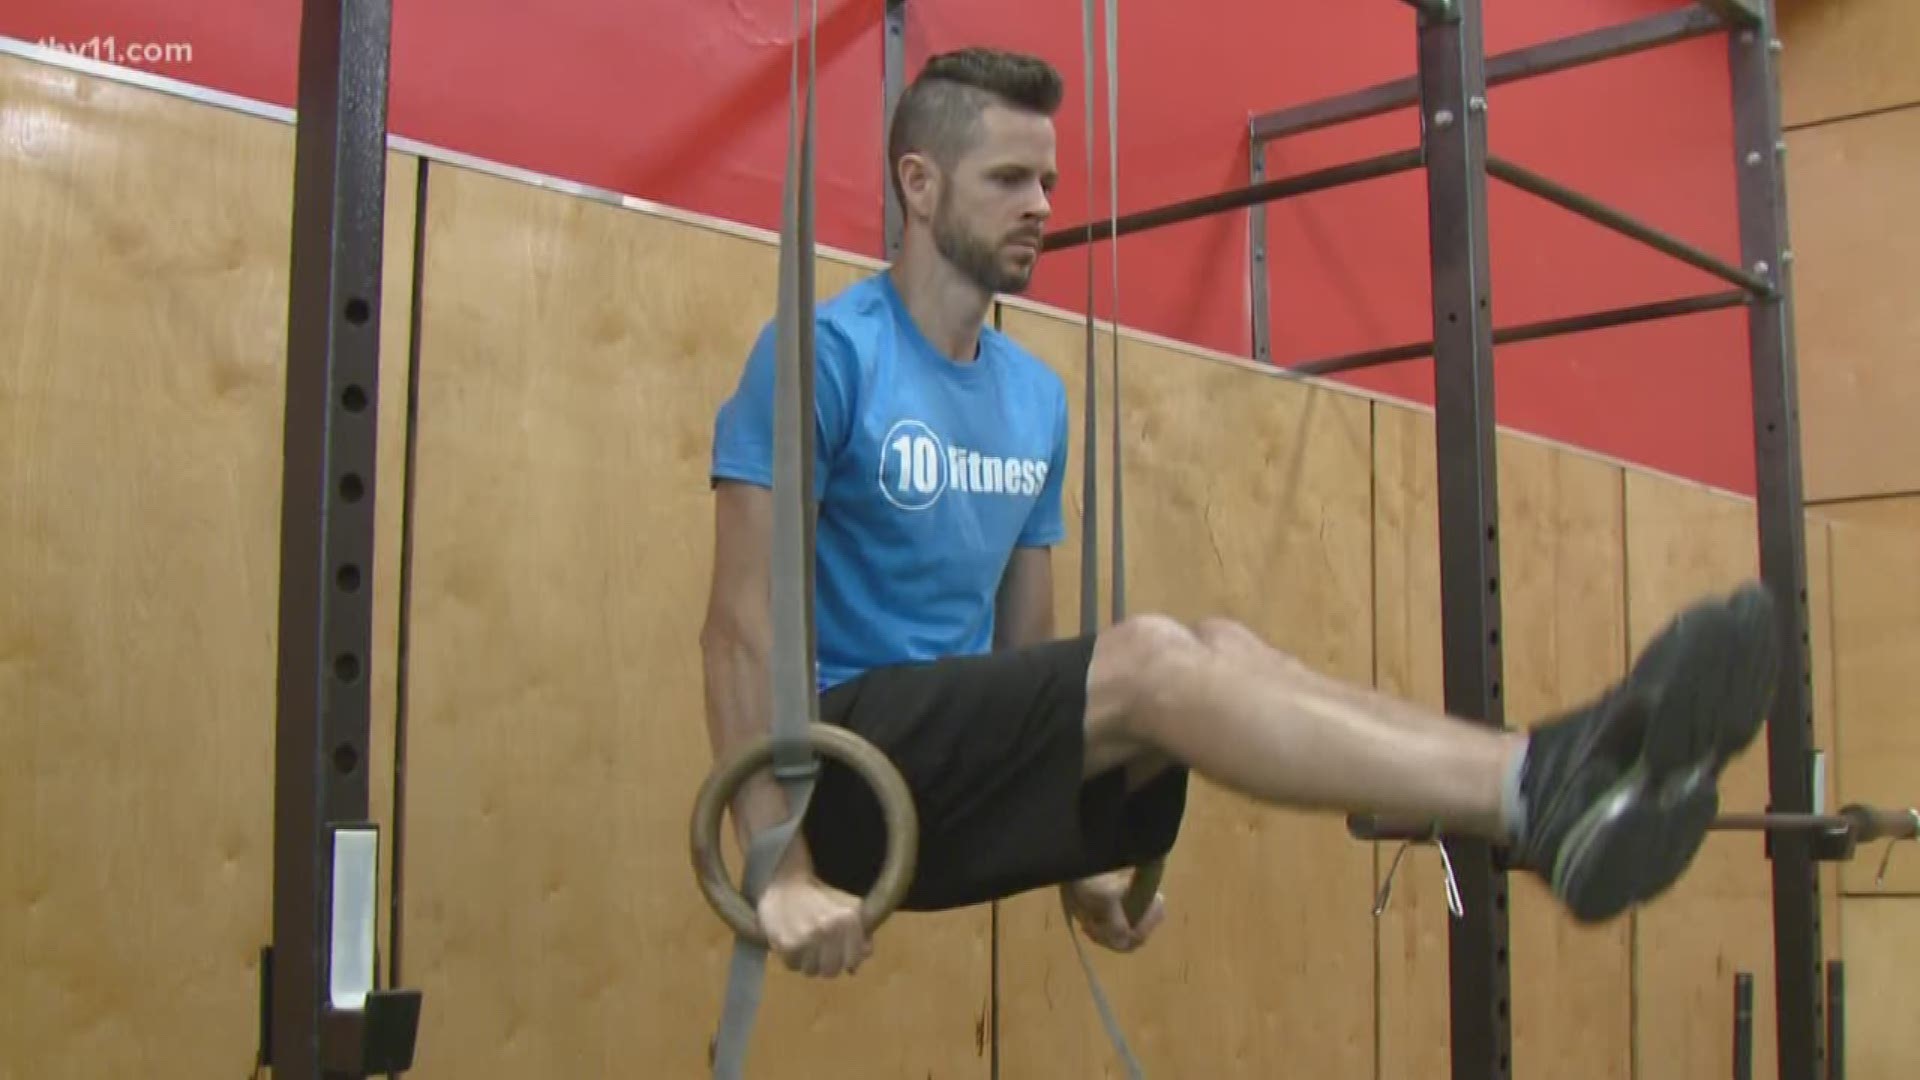 A Little Rock native shows off his fitness skills, competing on American Ninja Warrior.